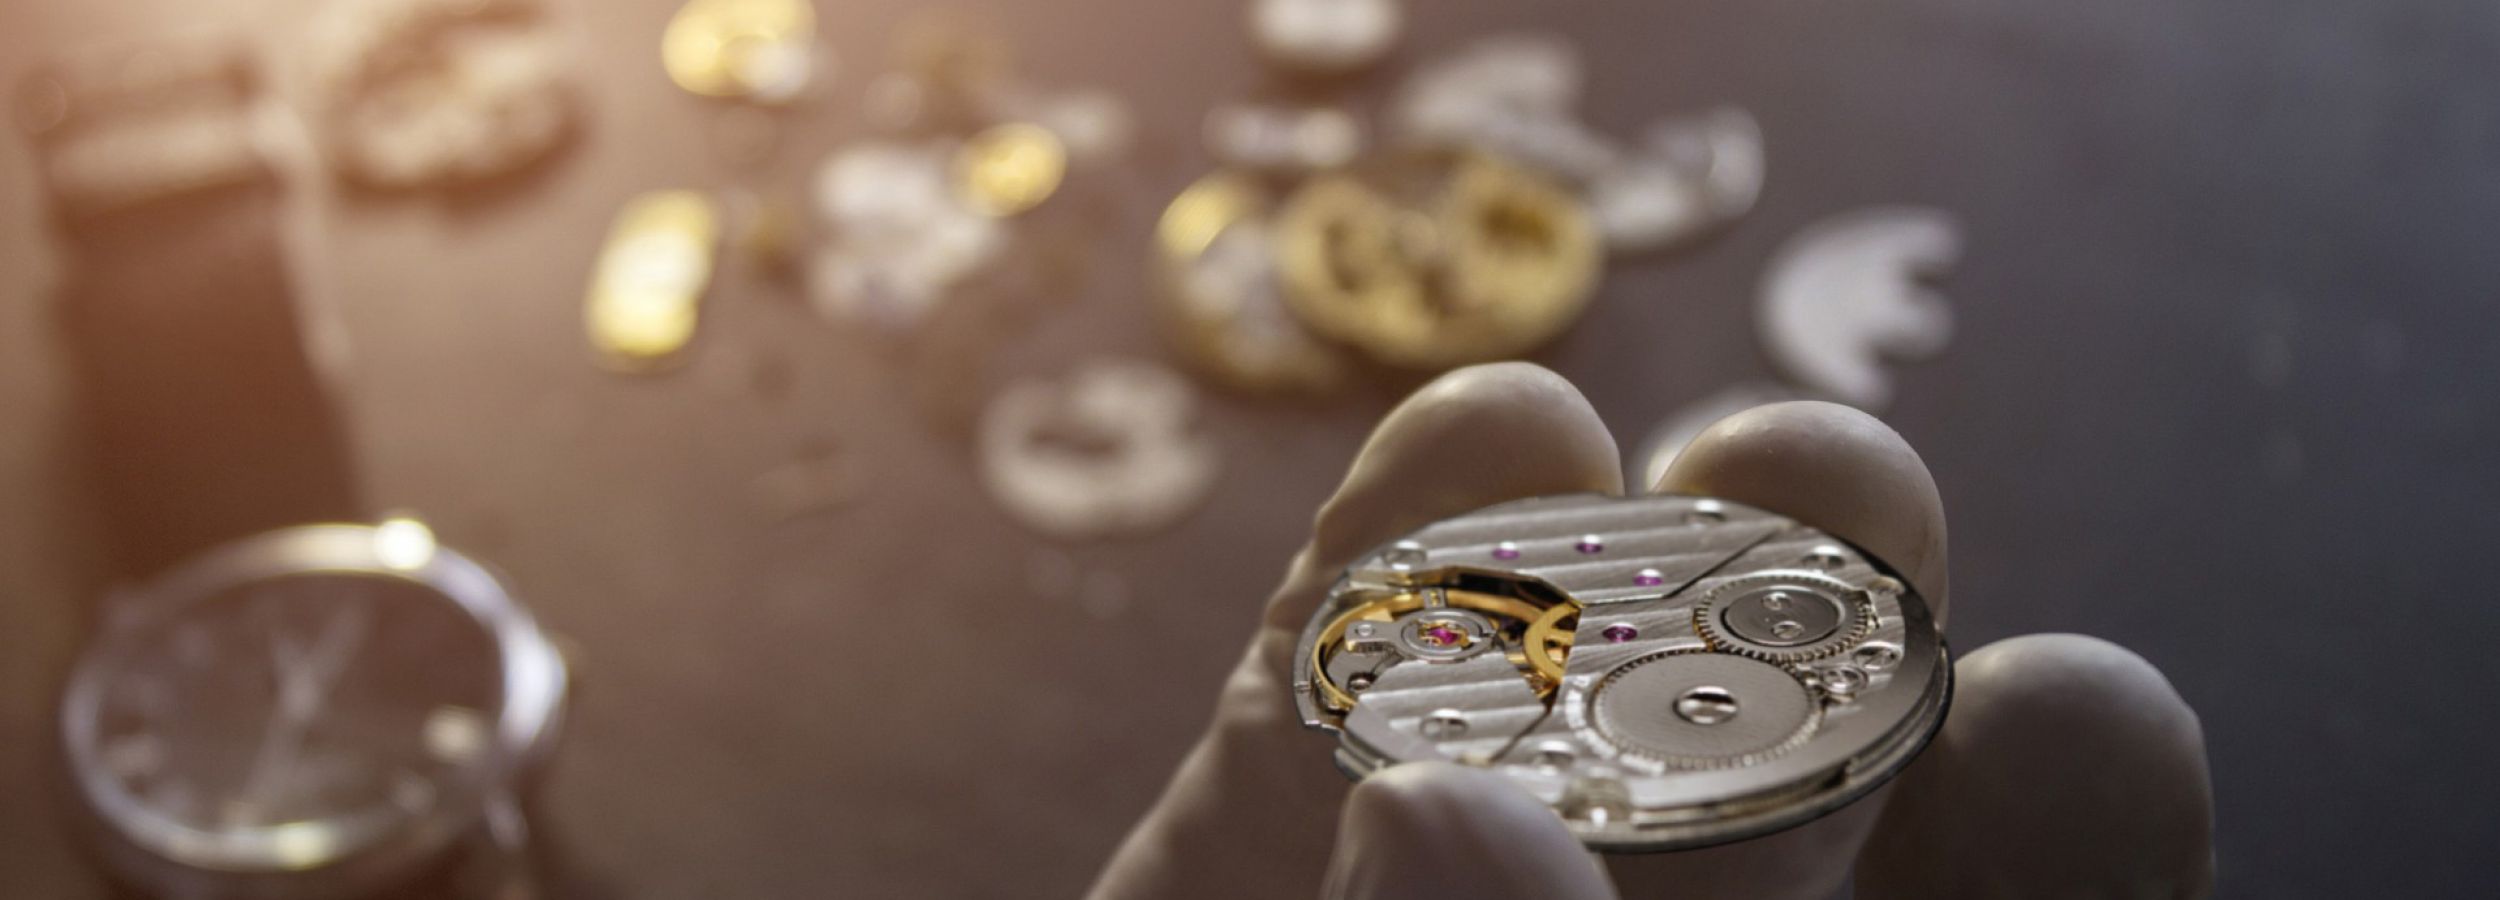 Fine Art of Watchmaking - Made in Germany - We design and produce watches of high quality, sophisticated and individual design at an optimal price-performance...